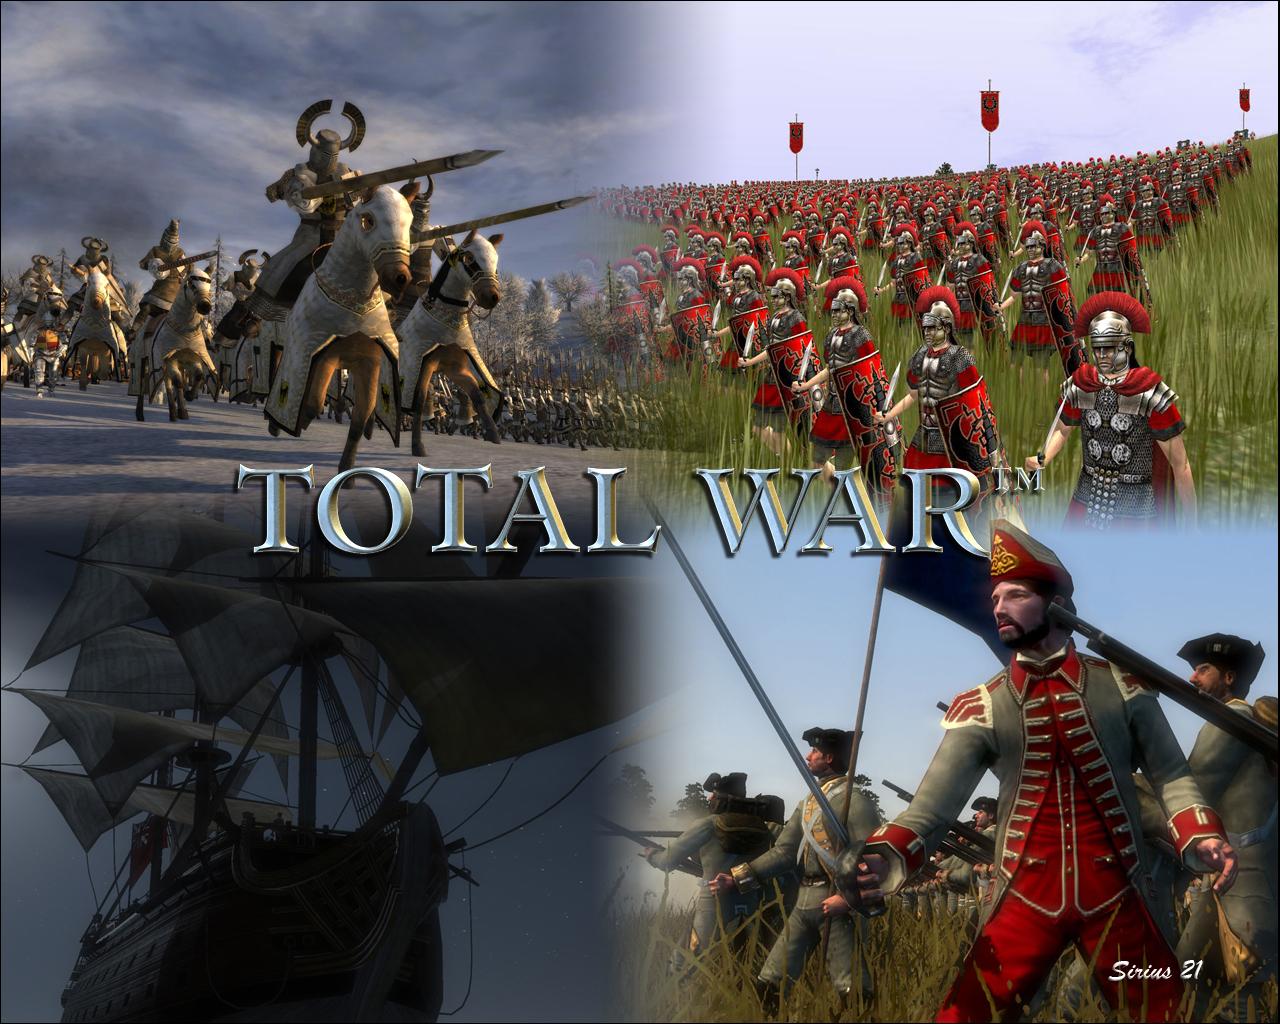 Empire Total War free Wallpapers 24 photos for your desktop